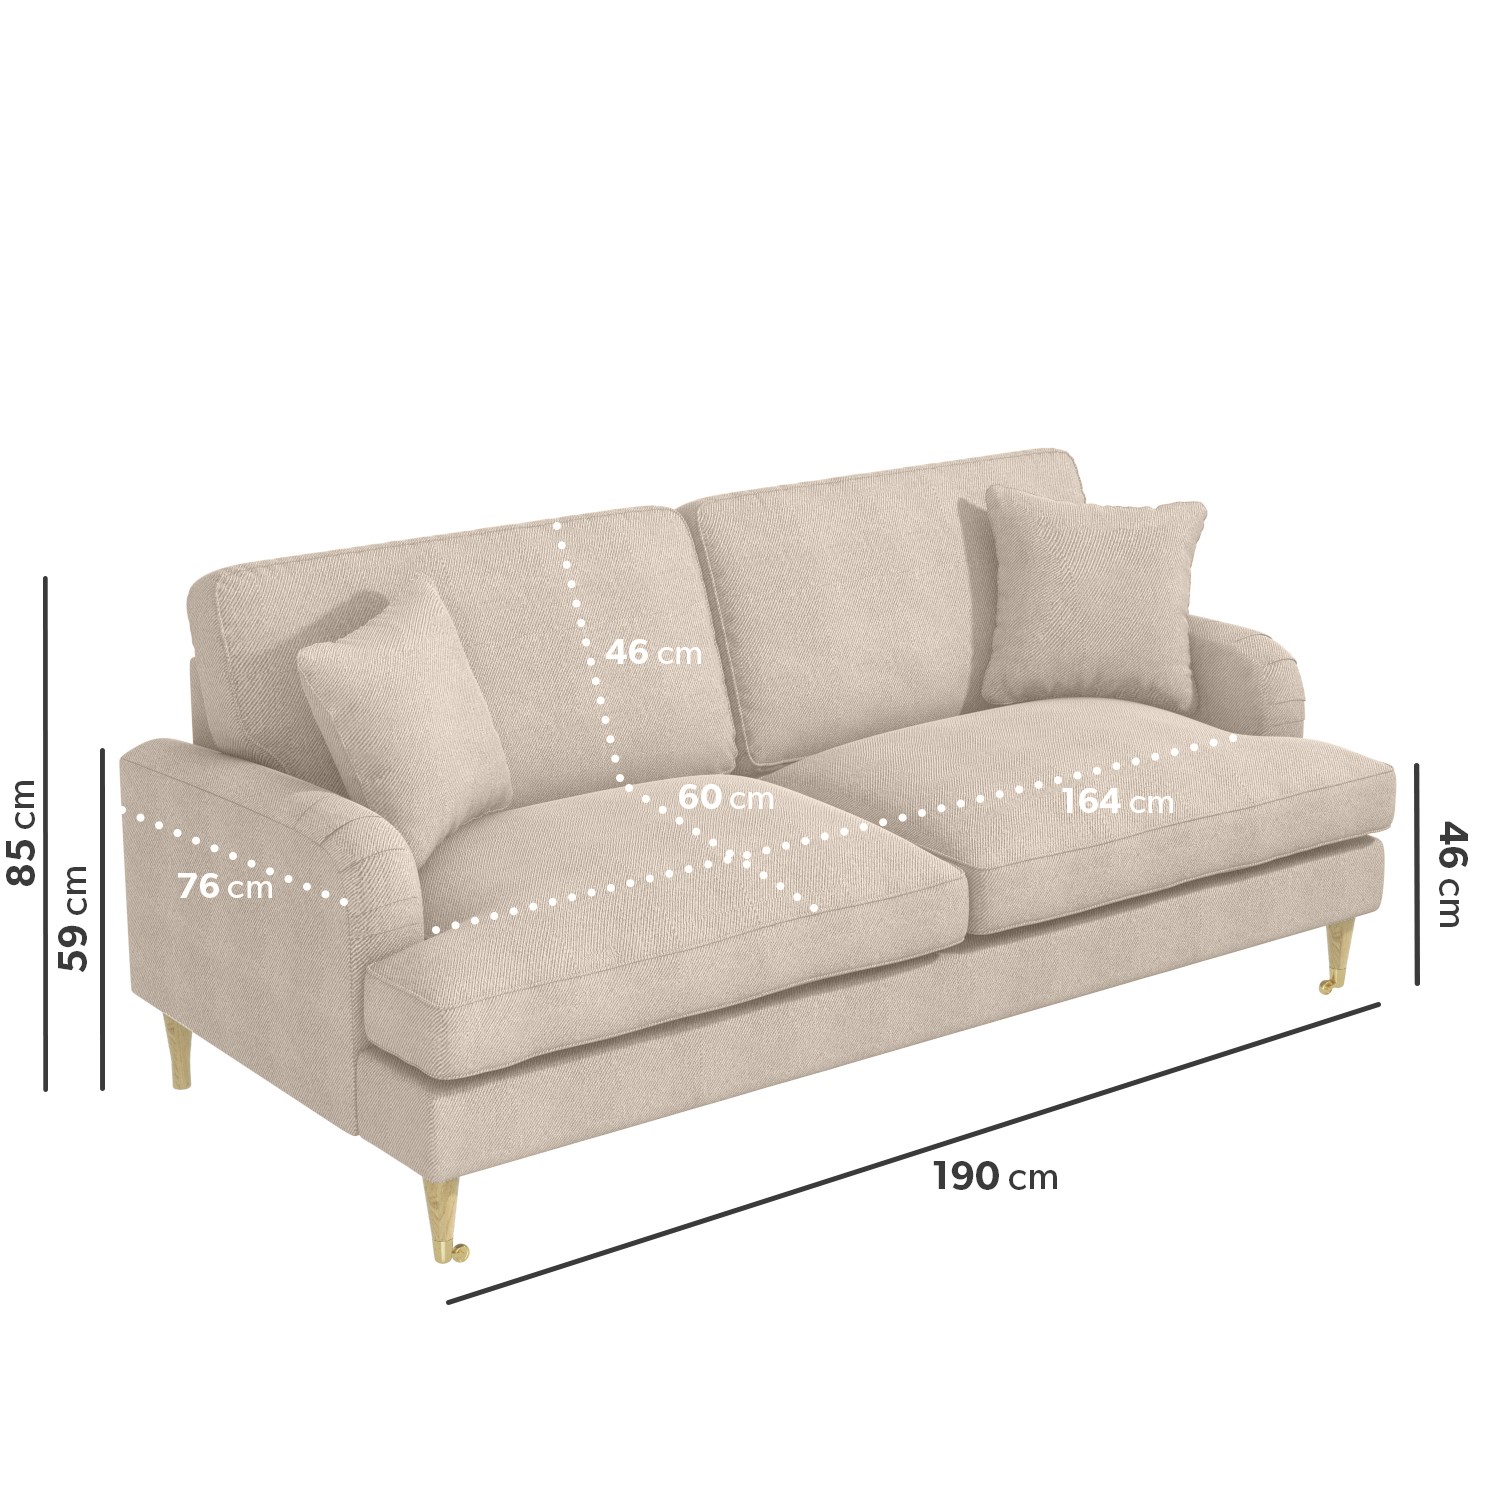 Read more about Beige woven fabric 3 seater sofa payton